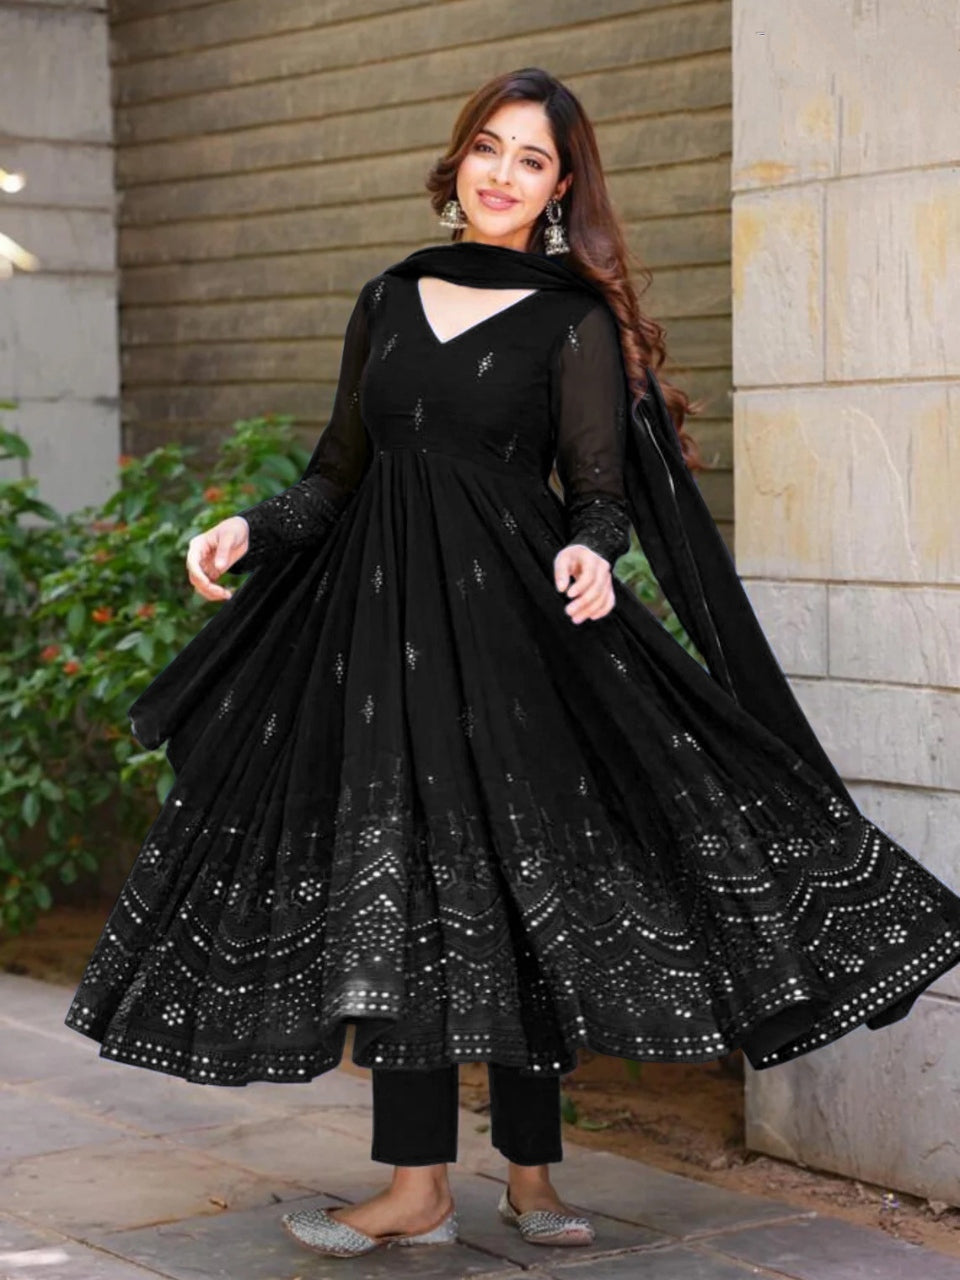 2022 Black Lace Evening Dresses Big V Neck Long Sleeves High Slit Women  Party Prom Dressing Gowns Mermaid Plus Size - AliExpress